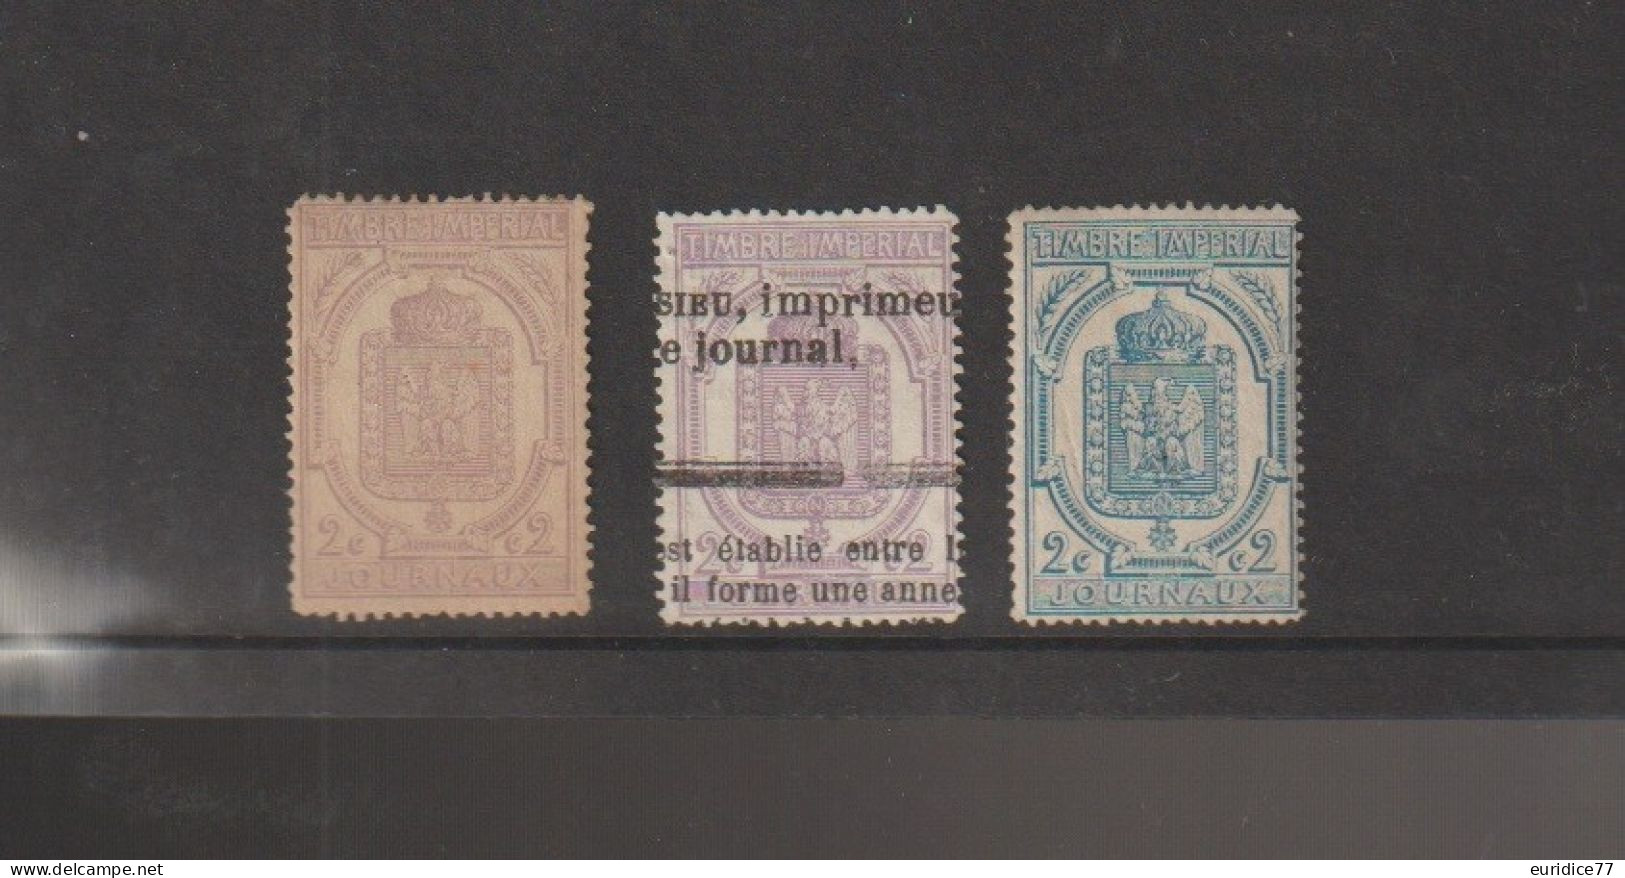 France 1869 - Timbre Imperial Journaux * - Periódicos